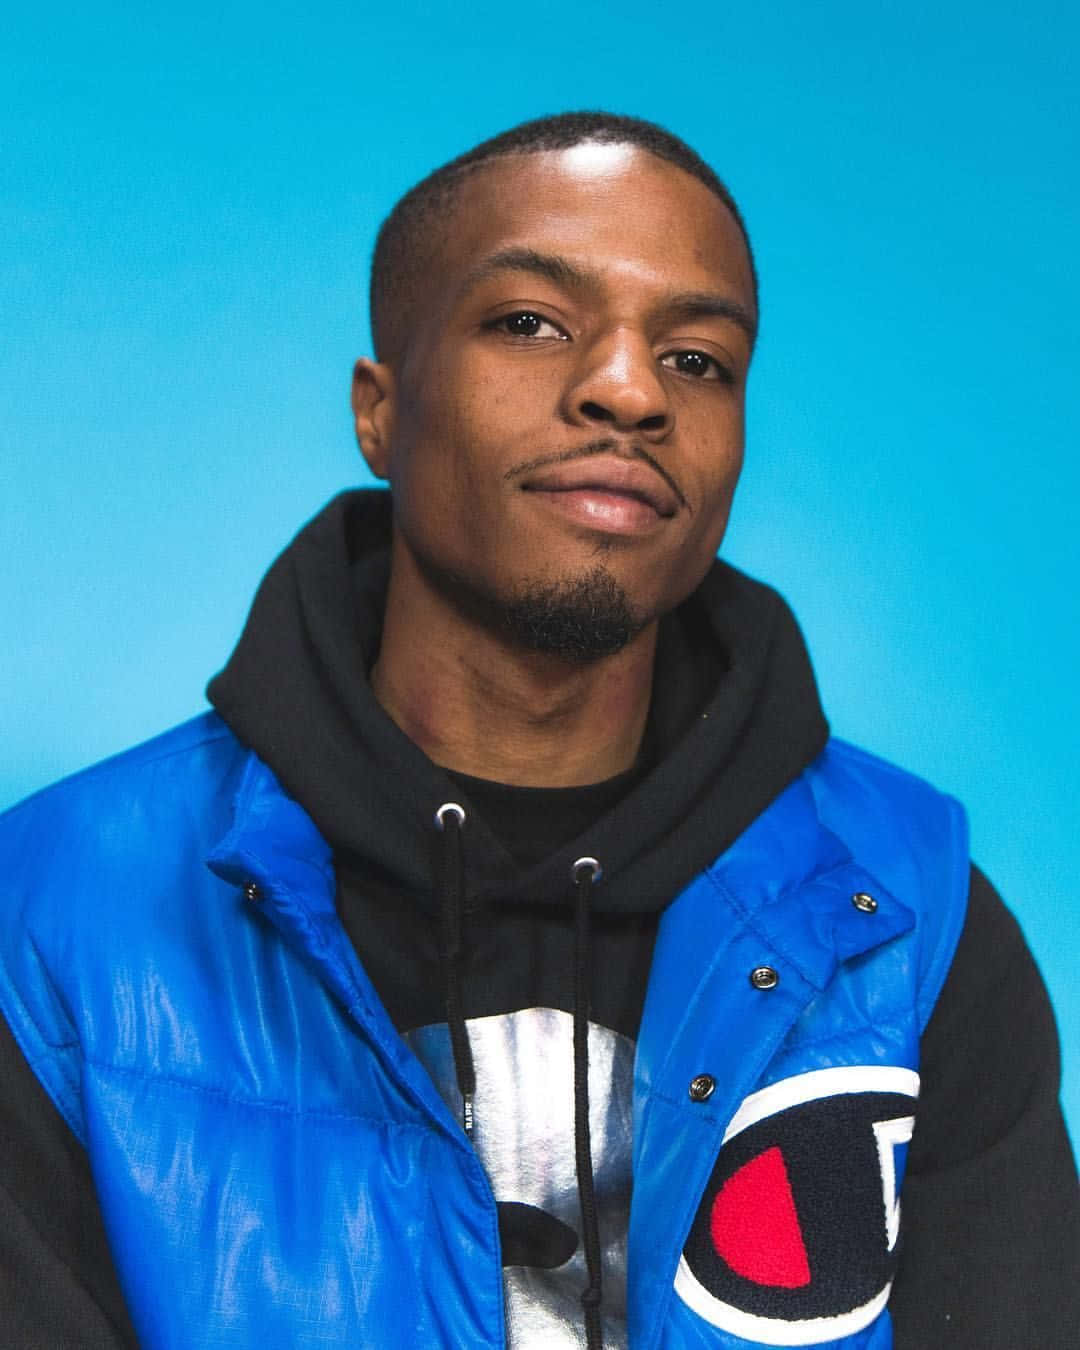 Rapper, producer and songwriter Pierre Bourne performing Wallpaper